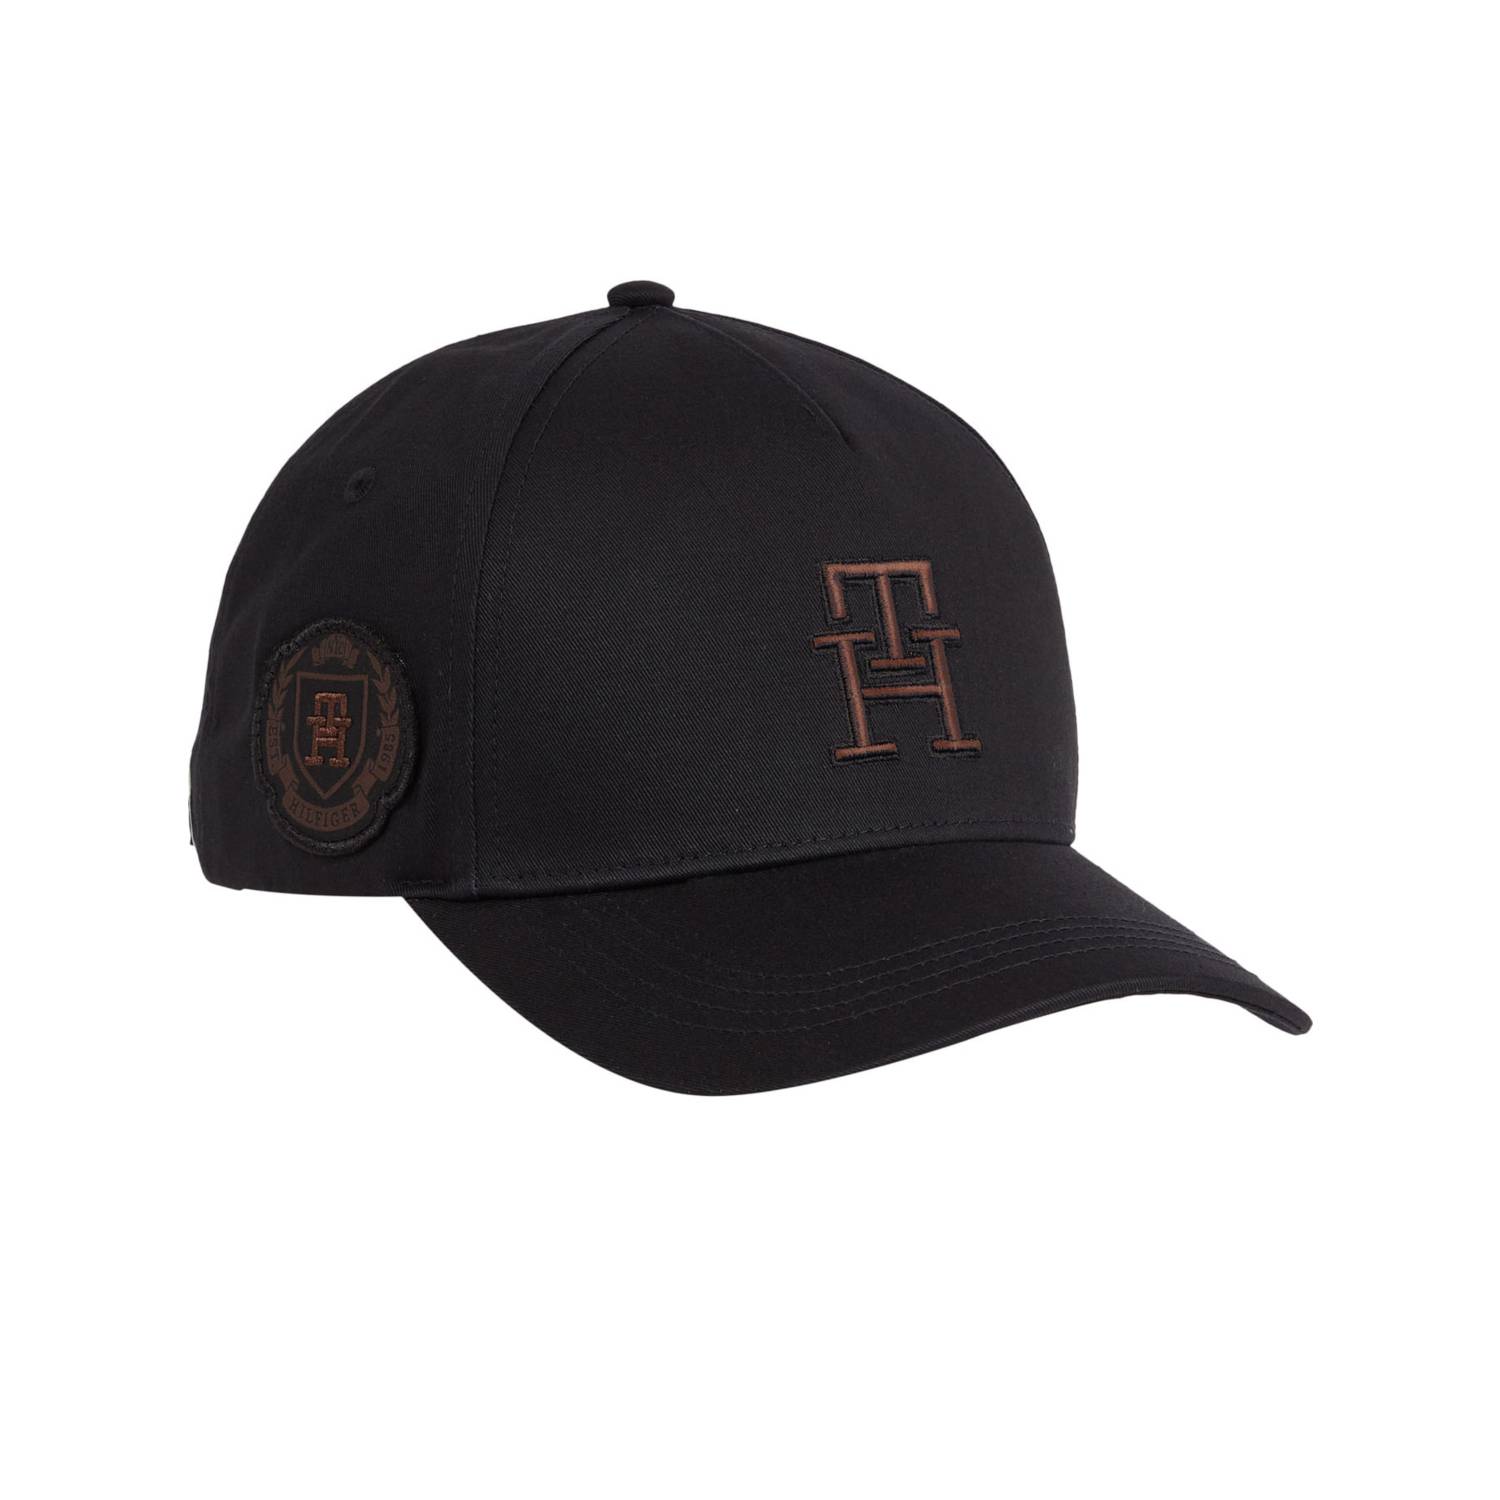 Gorra Classic Bb Cap Hombre Negro Tommy Hilfiger - tommycolombia